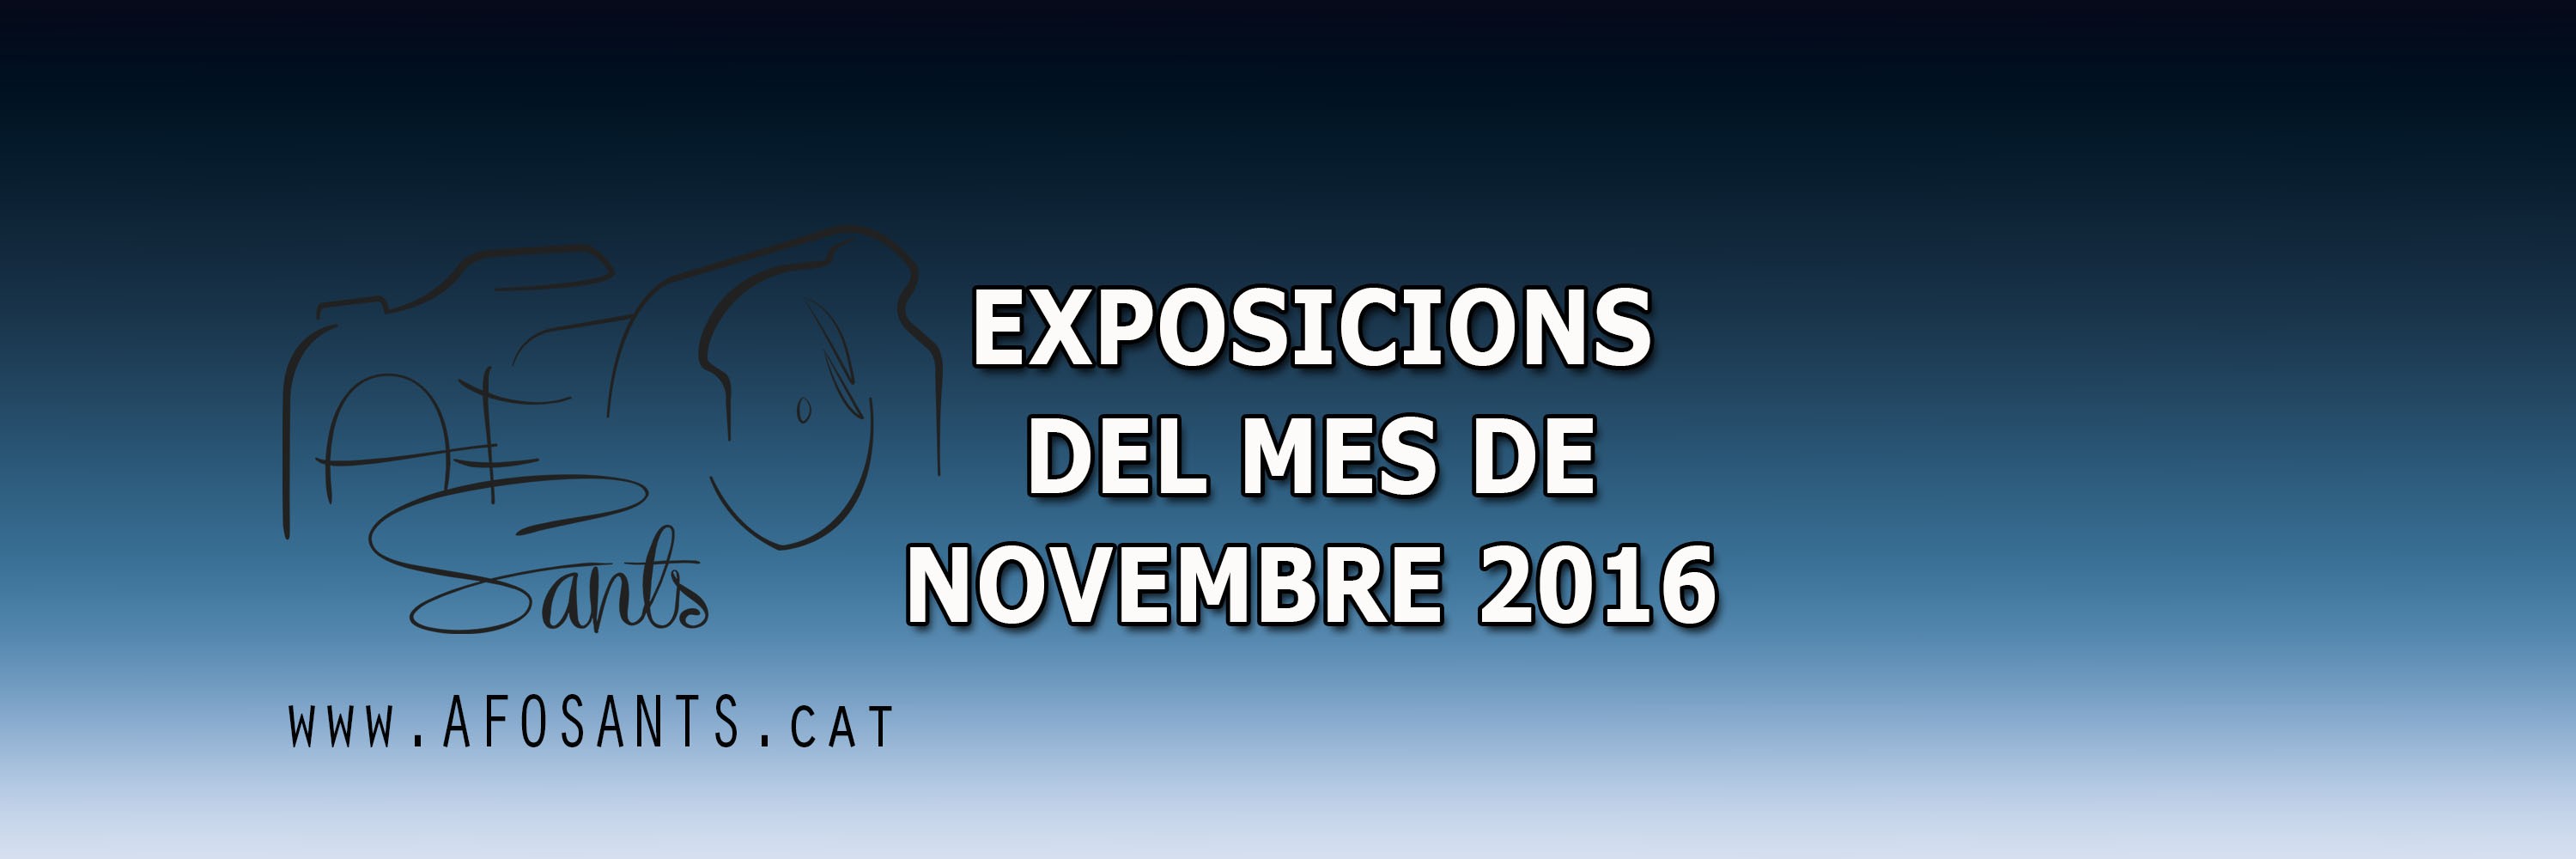 cartel-mailling-expo